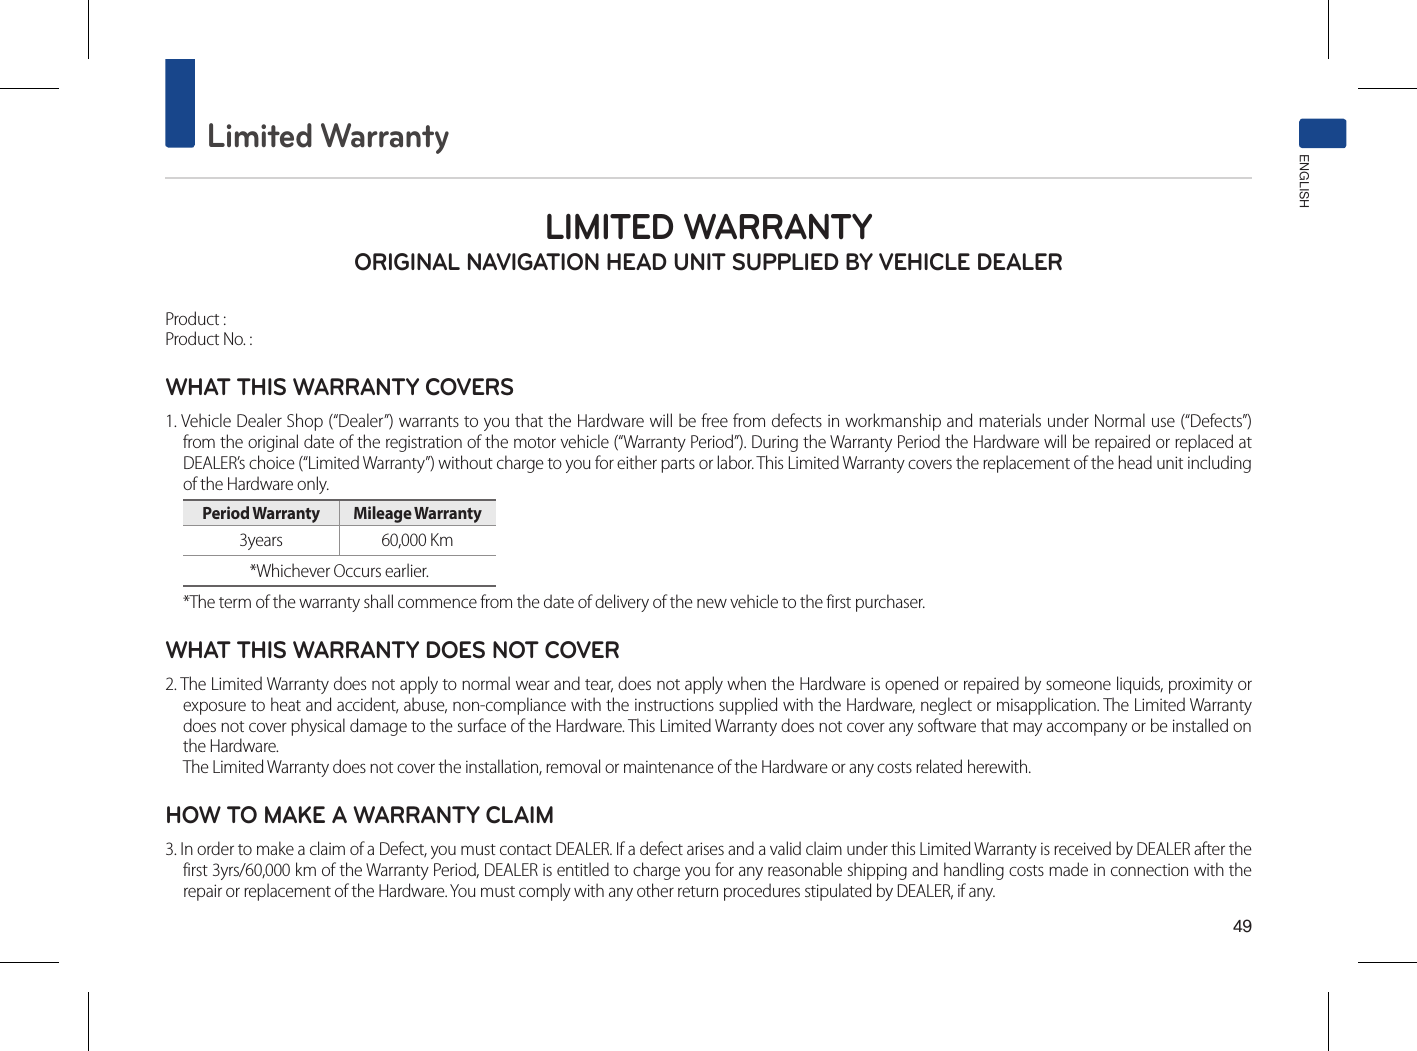 49Limited WarrantyENGLISHLIMITED WARRANTY ORIGINAL NAVIGATION HEAD UNIT SUPPLIED BY VEHICLE DEALER Product : Product No. : WHAT THIS WARRANTY COVERS 1. Vehicle Dealer Shop (“Dealer”) warrants to you that the Hardware will be free from defects in workmanship and materials under Normal use (“Defects”) from the original date of the registration of the motor vehicle (“Warranty Period”). During the Warranty Period the Hardware will be repaired or replaced at DEALER’s choice (“Limited Warranty”) without charge to you for either parts or labor. This Limited Warranty covers the replacement of the head unit including of the Hardware only. Period Warranty  Mileage Warranty 3years  60,000 Km *Whichever Occurs earlier.*The term of the warranty shall commence from the date of delivery of the new vehicle to the first purchaser.WHAT THIS WARRANTY DOES NOT COVER 2. The Limited Warranty does not apply to normal wear and tear, does not apply when the Hardware is opened or repaired by someone liquids, proximity or exposure to heat and accident, abuse, non-compliance with the instructions supplied with the Hardware, neglect or misapplication. The Limited Warranty does not cover physical damage to the surface of the Hardware. This Limited Warranty does not cover any software that may accompany or be installed on the Hardware. The Limited Warranty does not cover the installation, removal or maintenance of the Hardware or any costs related herewith.HOW TO MAKE A WARRANTY CLAIM3. In order to make a claim of a Defect, you must contact DEALER. If a defect arises and a valid claim under this Limited Warranty is received by DEALER after the first 3yrs/60,000 km of the Warranty Period, DEALER is entitled to charge you for any reasonable shipping and handling costs made in connection with the repair or replacement of the Hardware. You must comply with any other return procedures stipulated by DEALER, if any.